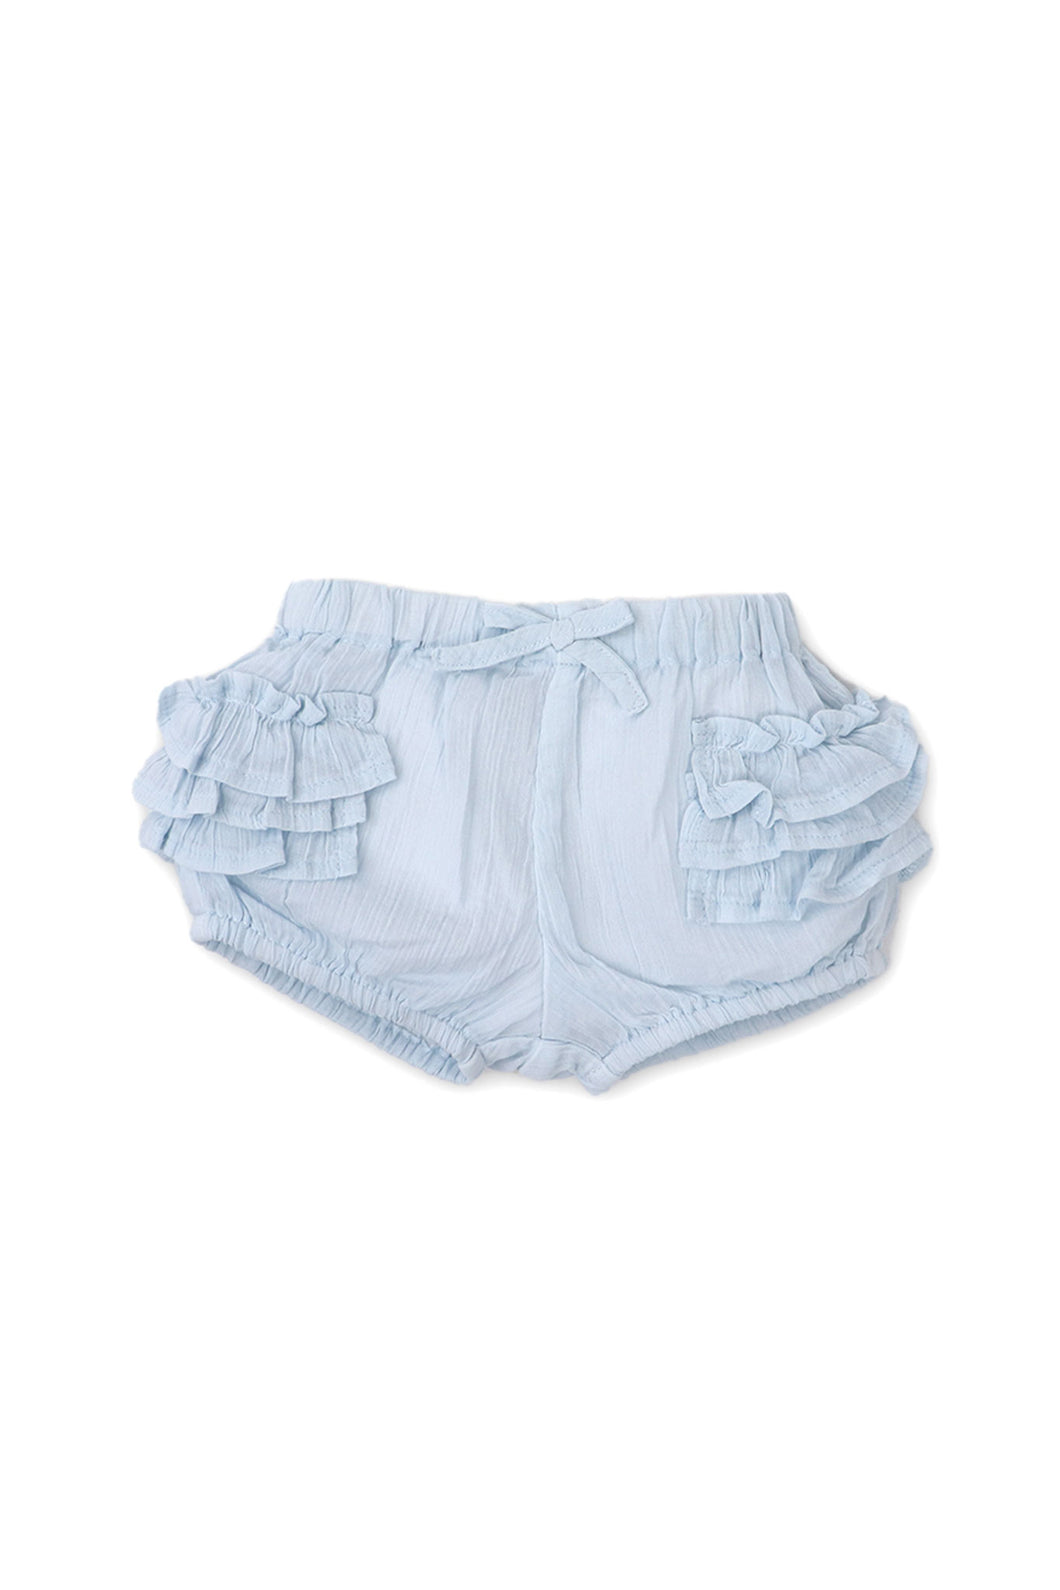 Gingersnaps Gingham Bloomers with Ruffles